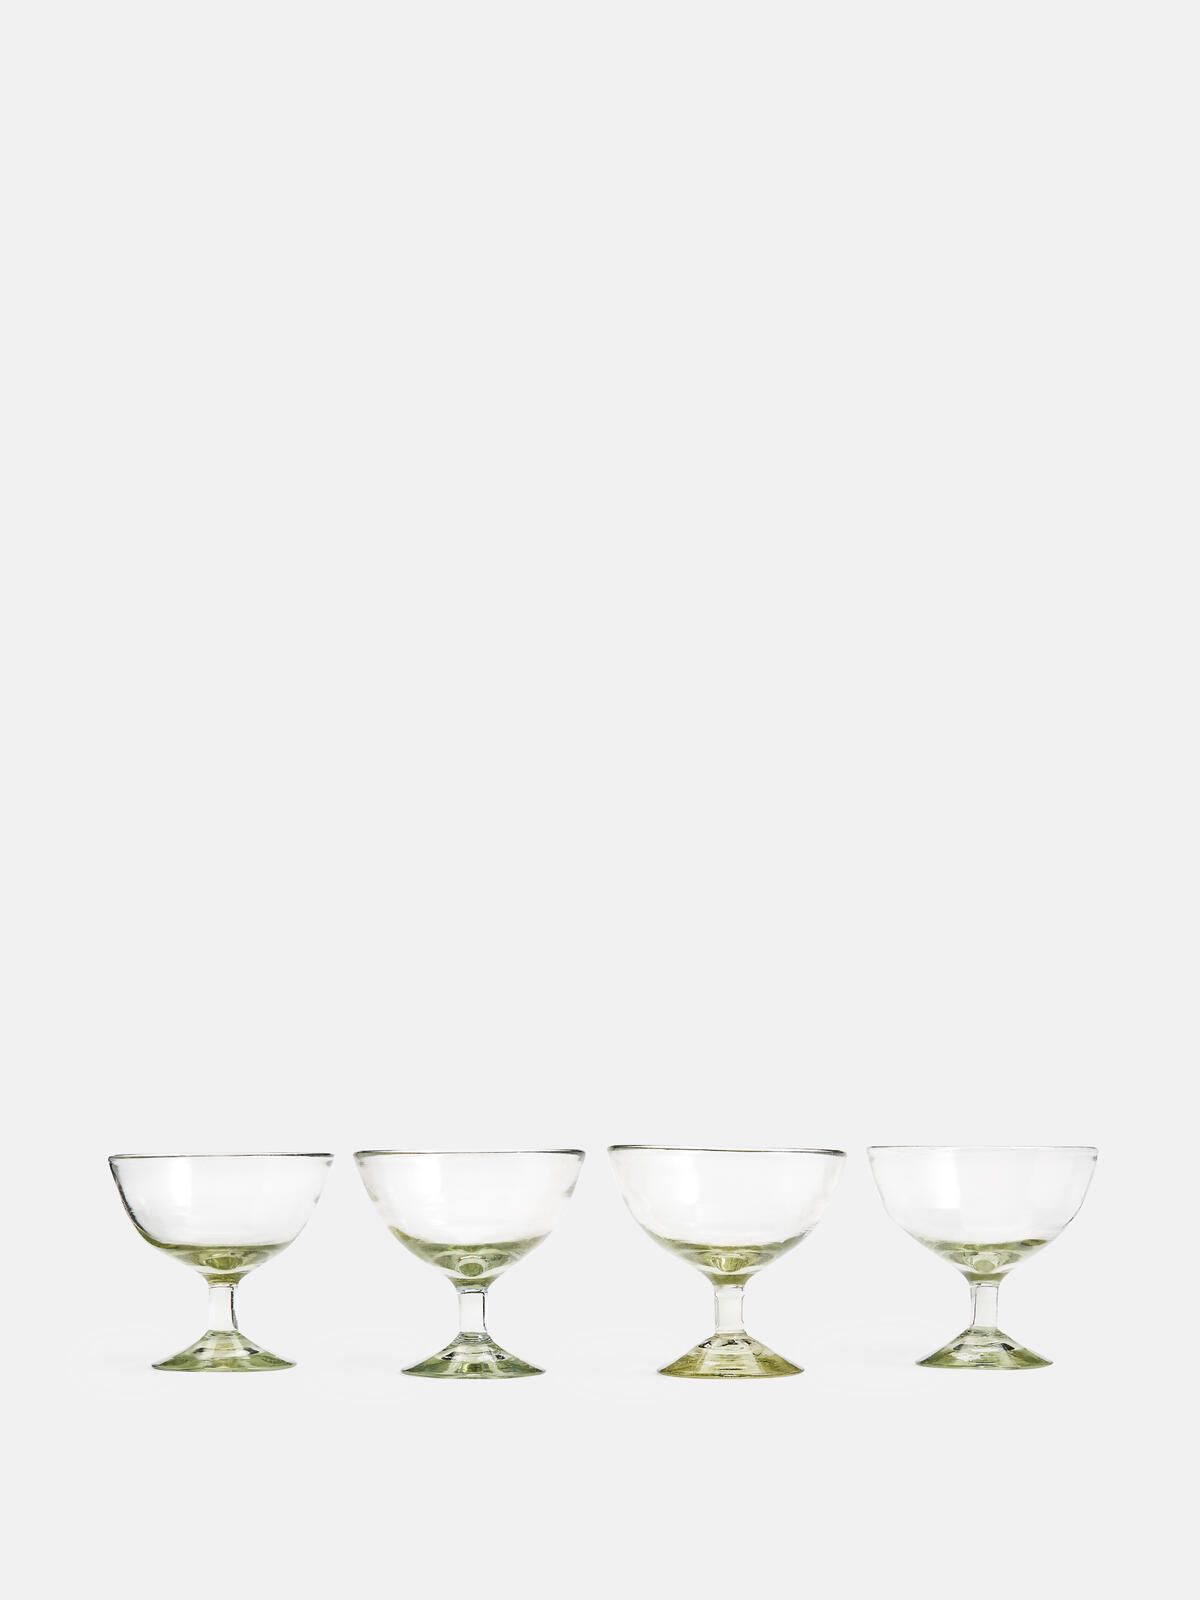 Country House Cocktail Glass, Set of Four | Soho Home Ltd